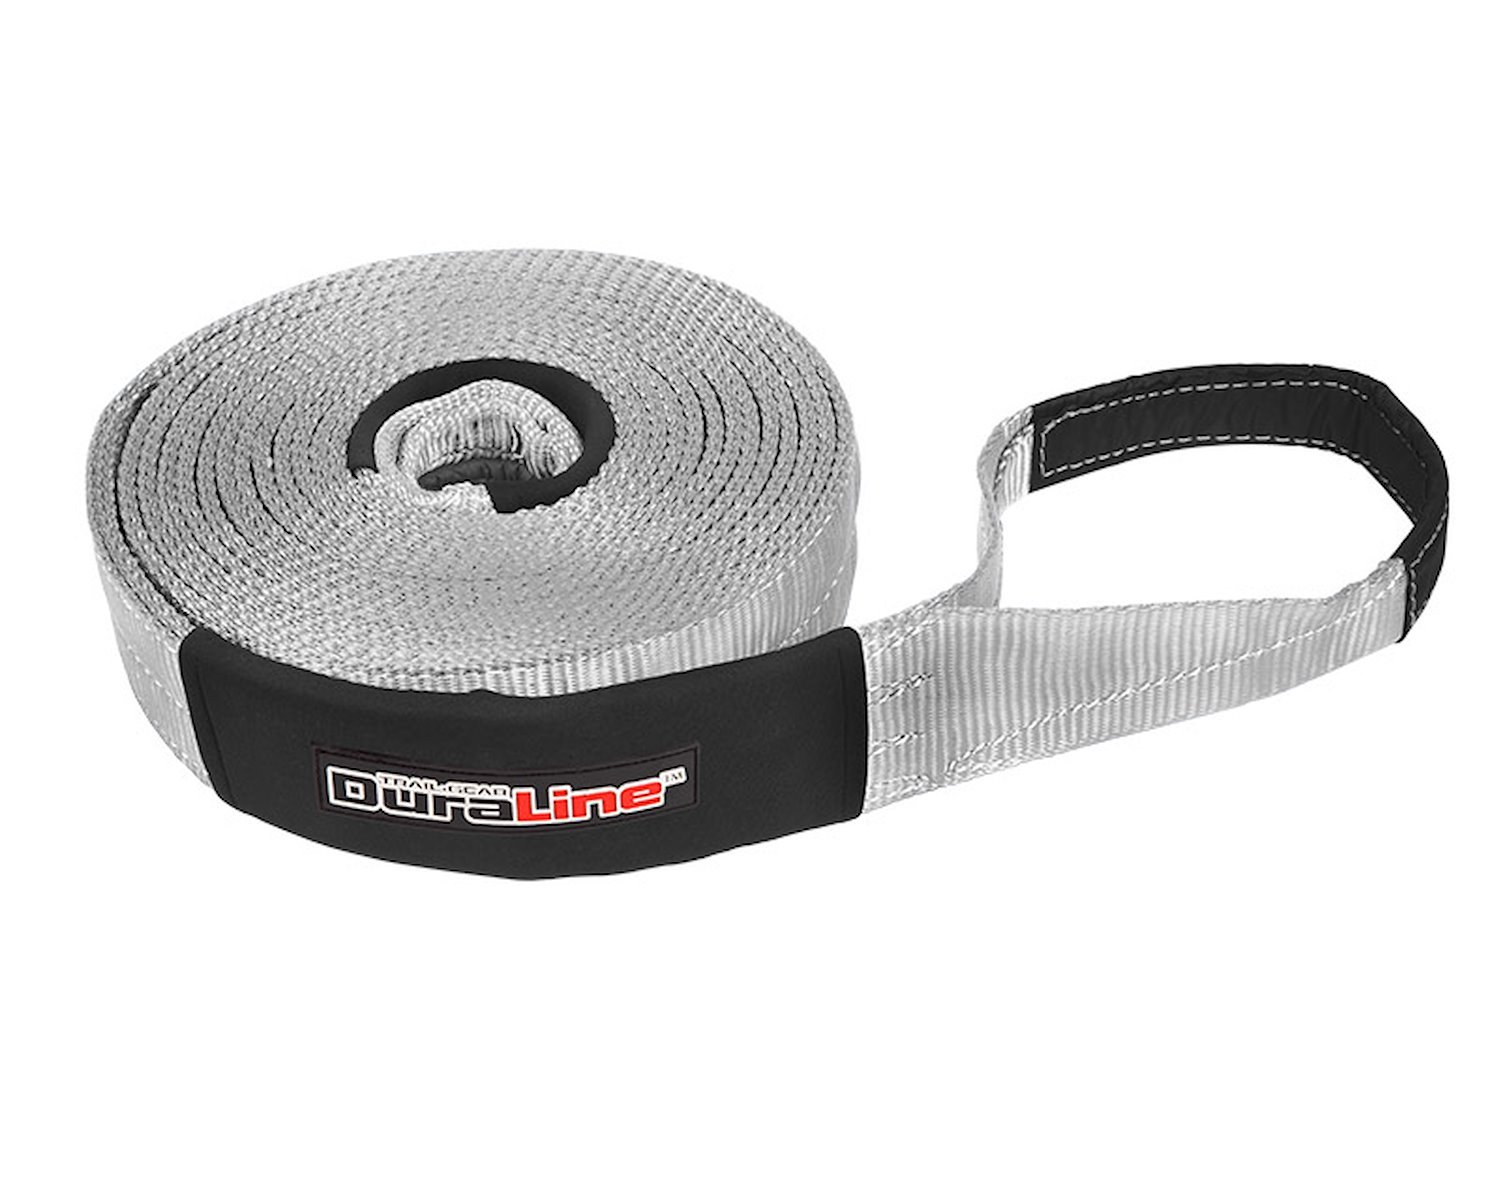 DuraLine Recovery straps 3 Inches wide